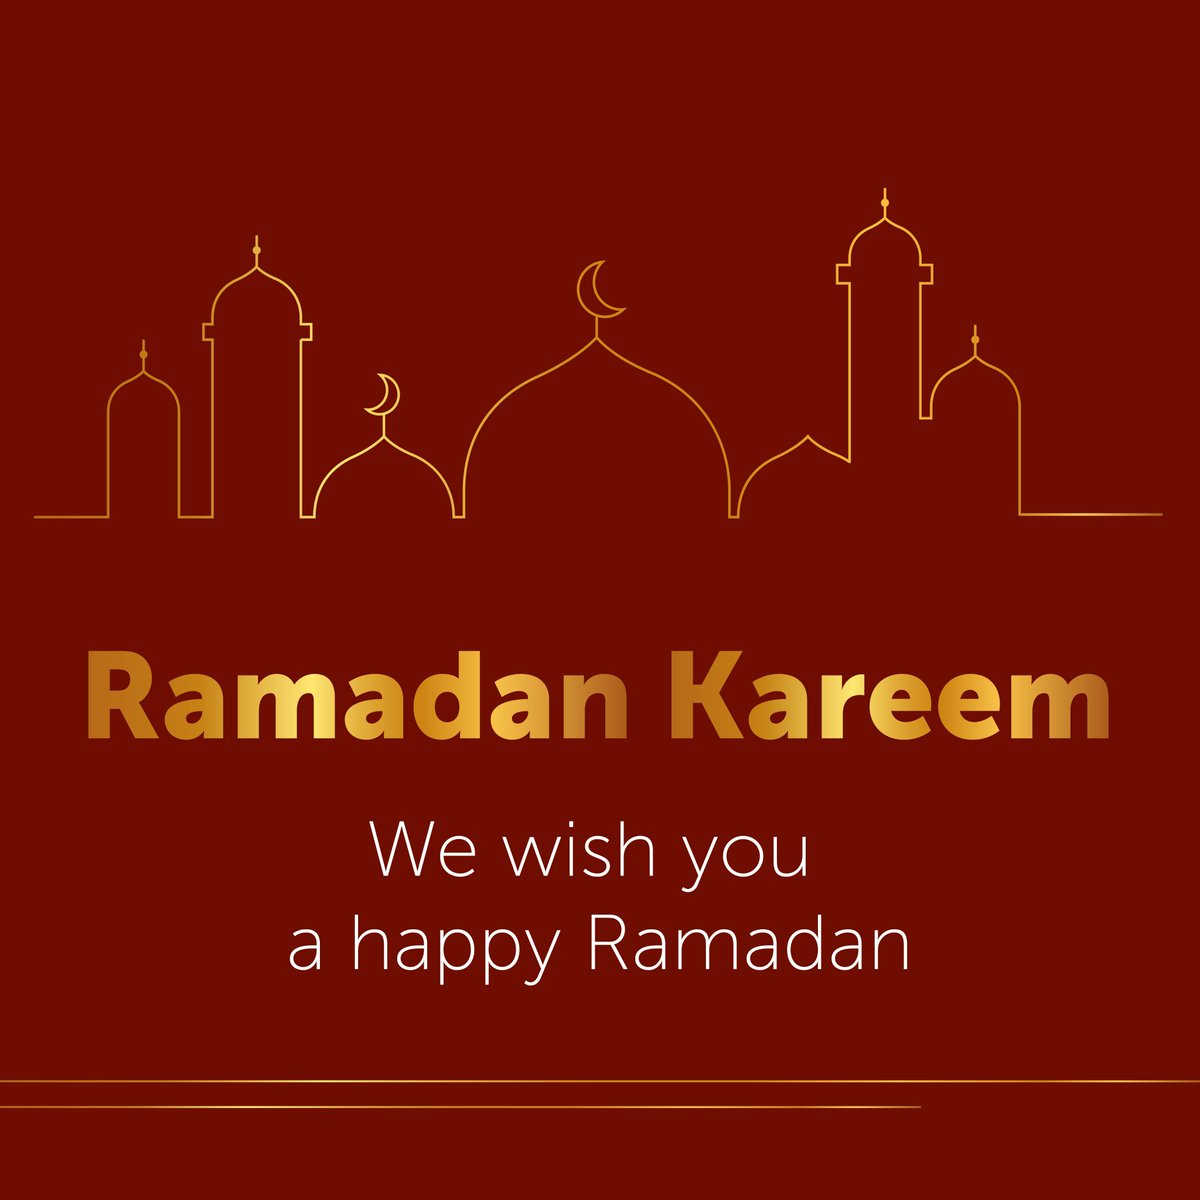 #RamadanKareem - At the beginning of the month of fasting, we wish all a happy and blessed Ramadan. #Wieland #WielandGroup #EmpoweringSuccess #EnablingSustainability